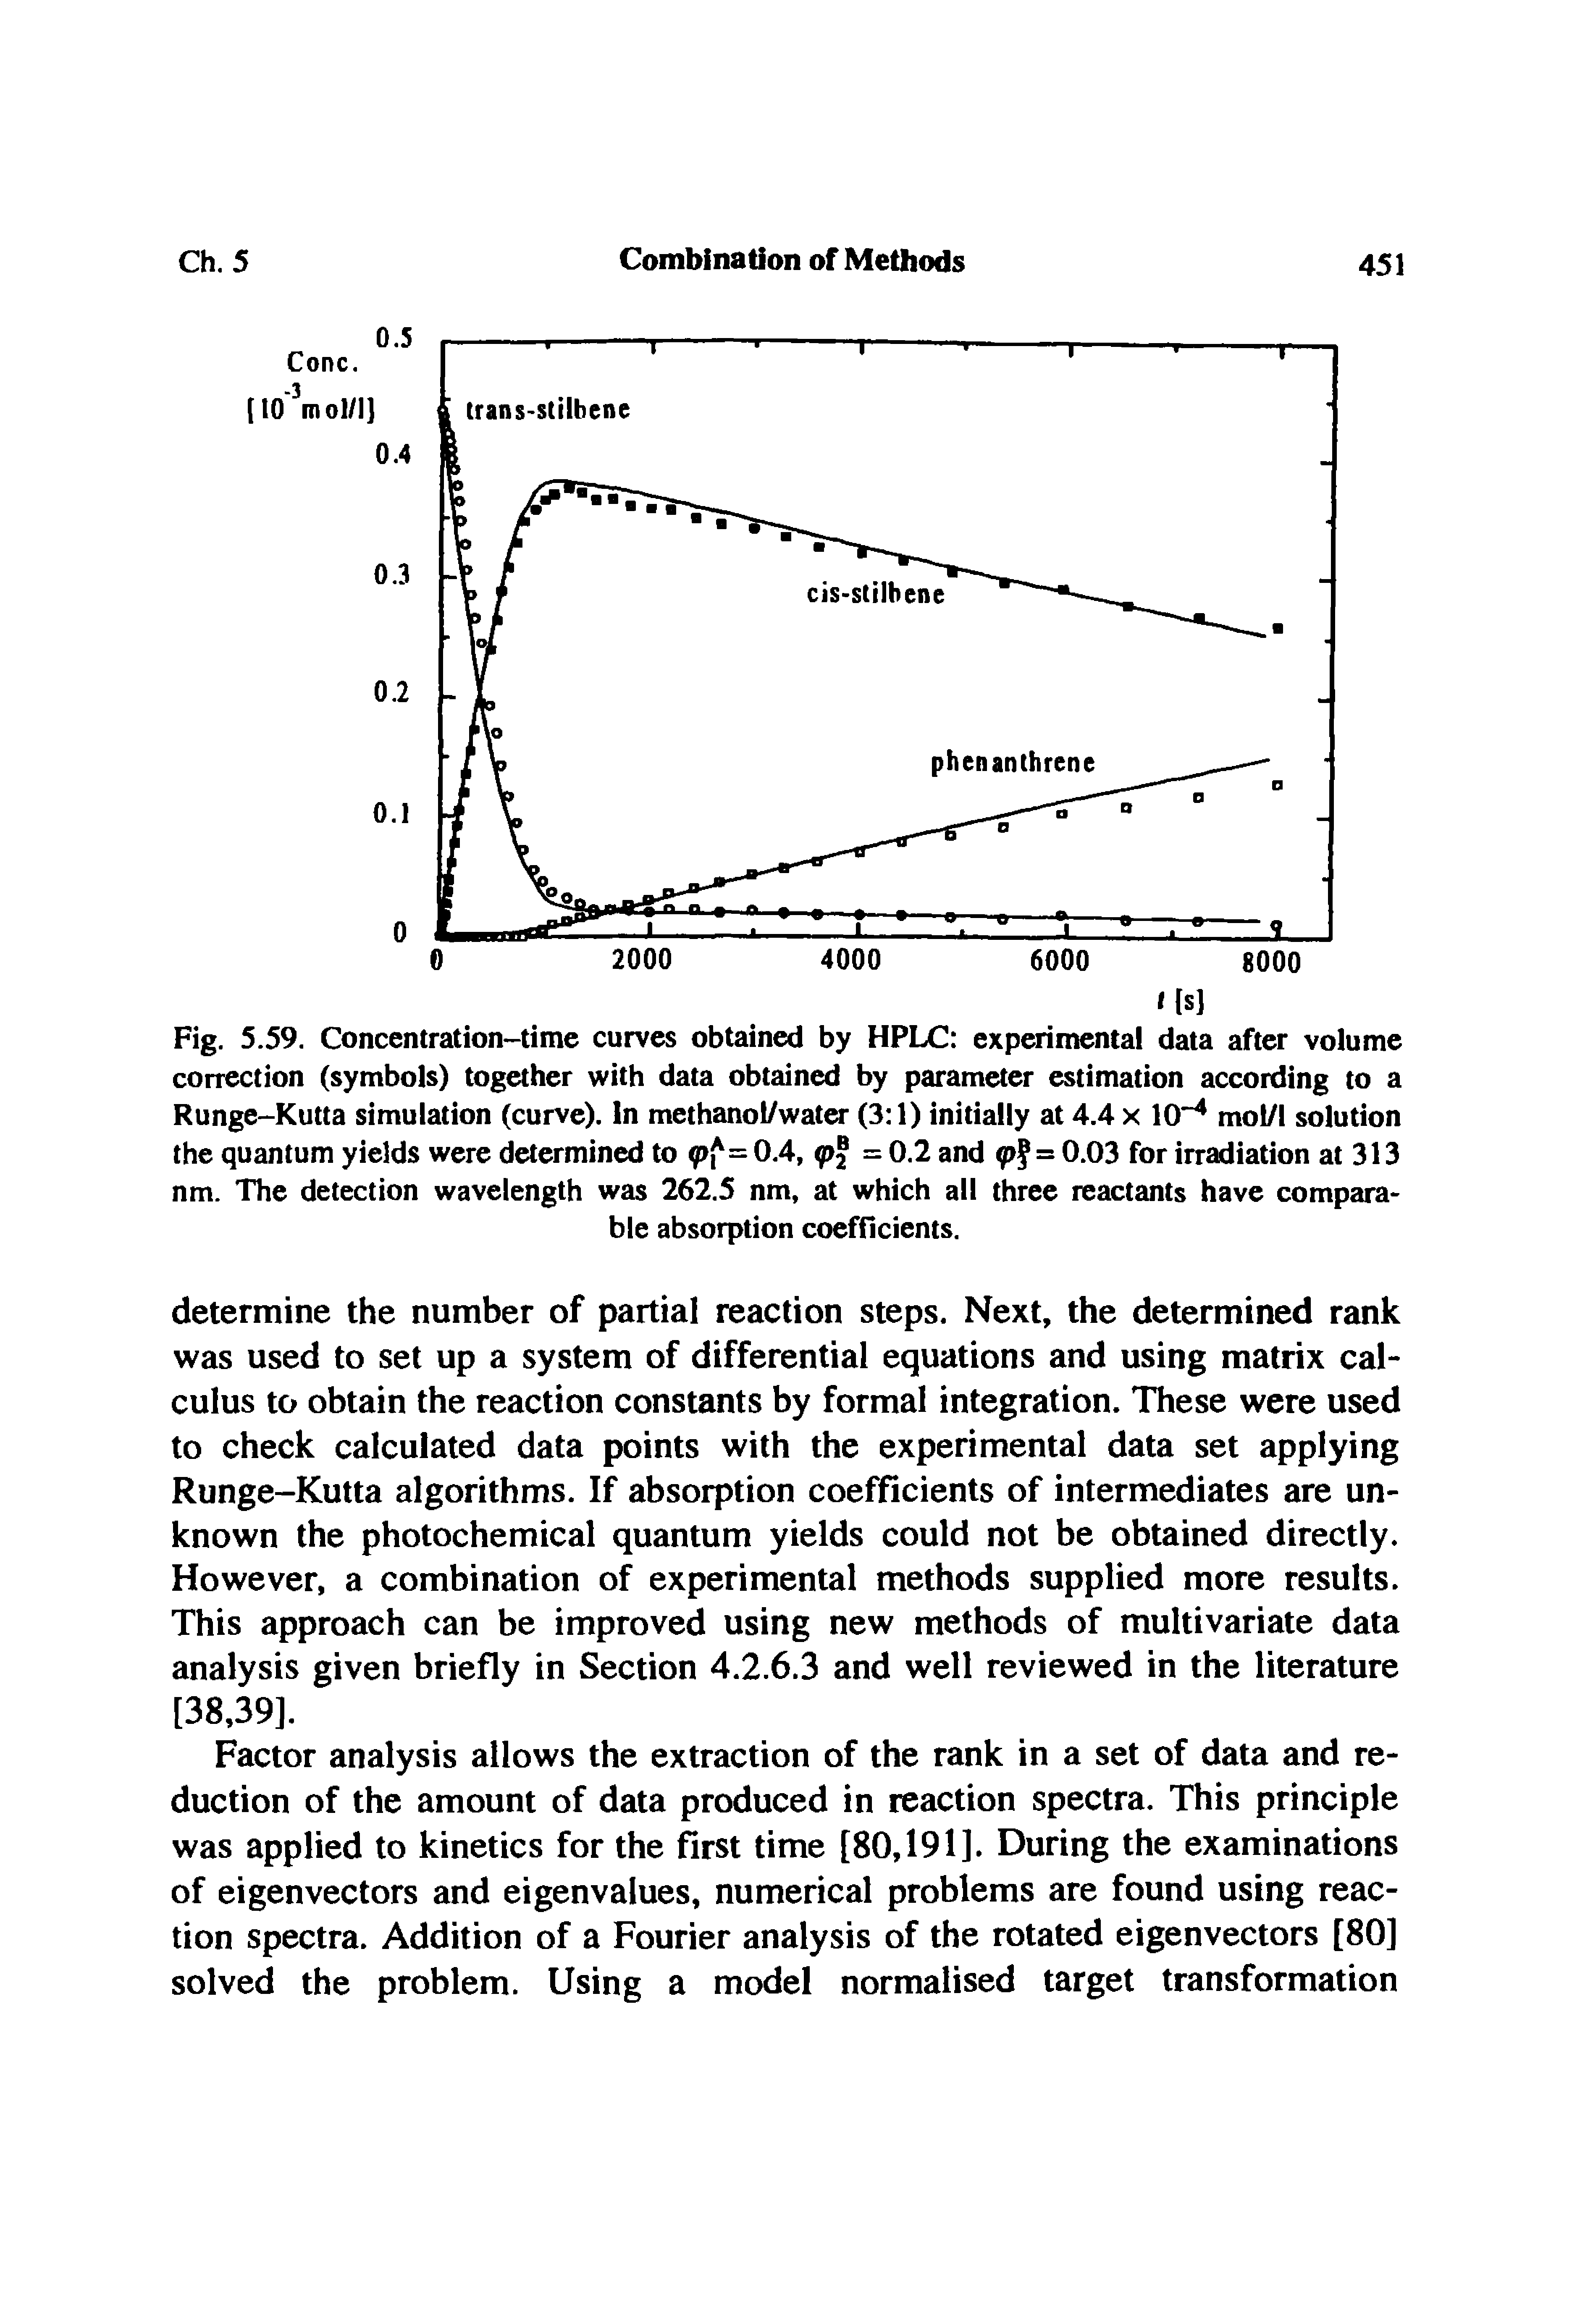 Fig. 5.59. Concentration-time curves obtained by HPLC experimental data after volume correction (symbols) together with data obtained by parameter estimation according to a Runge-Kutta simulation (curve). In methanol/water (3 1) initially at 4.4 x 10 mol/1 solution the quantum yields were determined to 0.4, = 0.2 and = 0.03 for irradiation at 313...